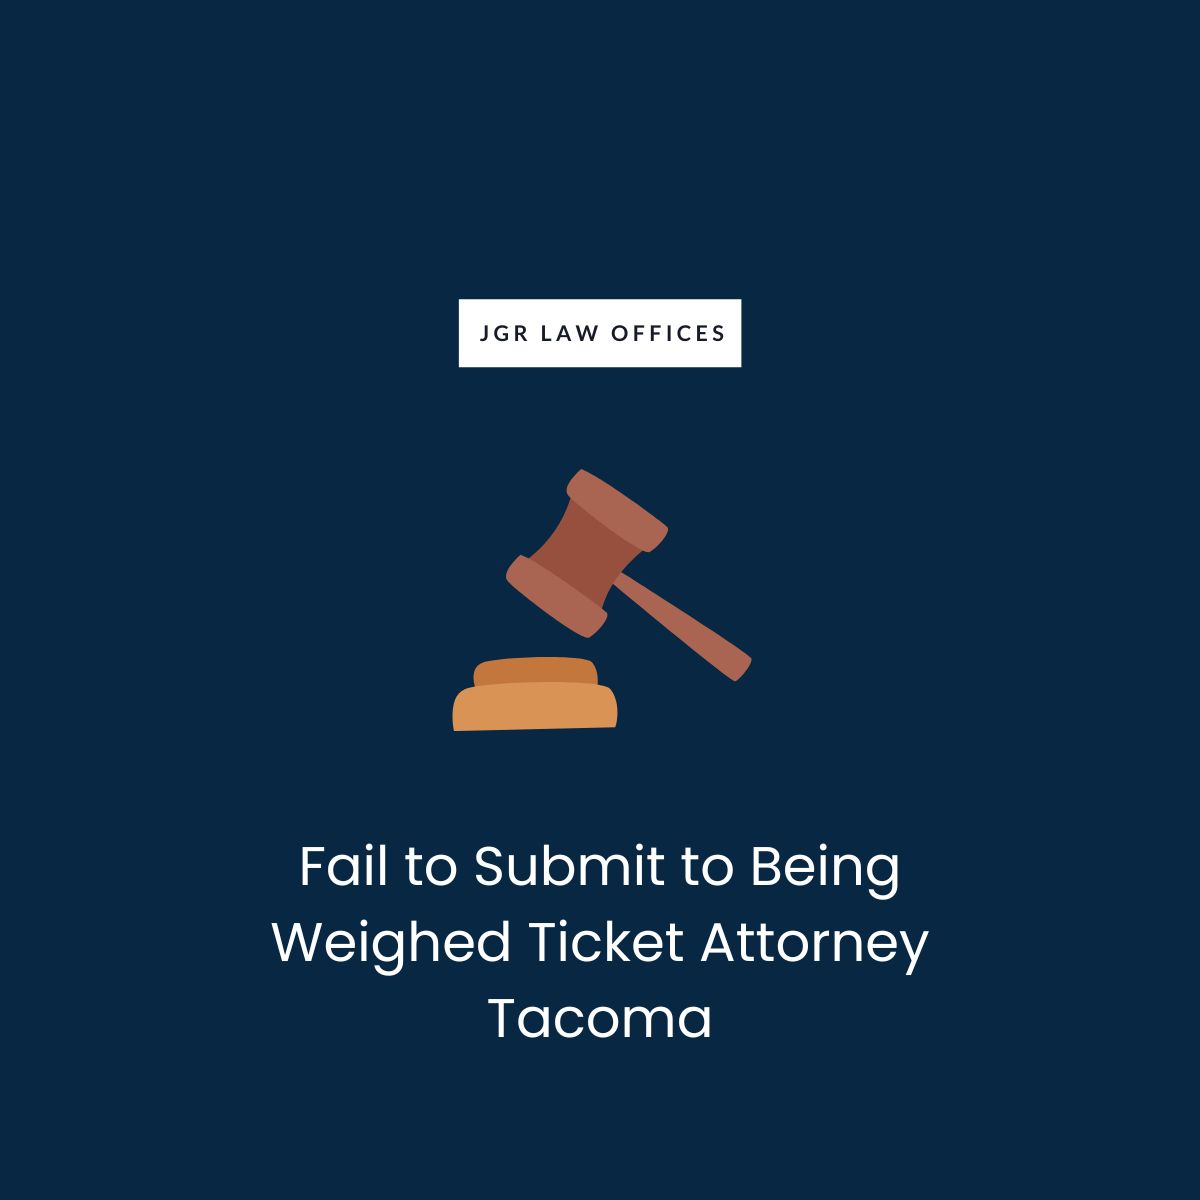 Fail to Submit to Being Weighed Ticket Attorney Tacoma